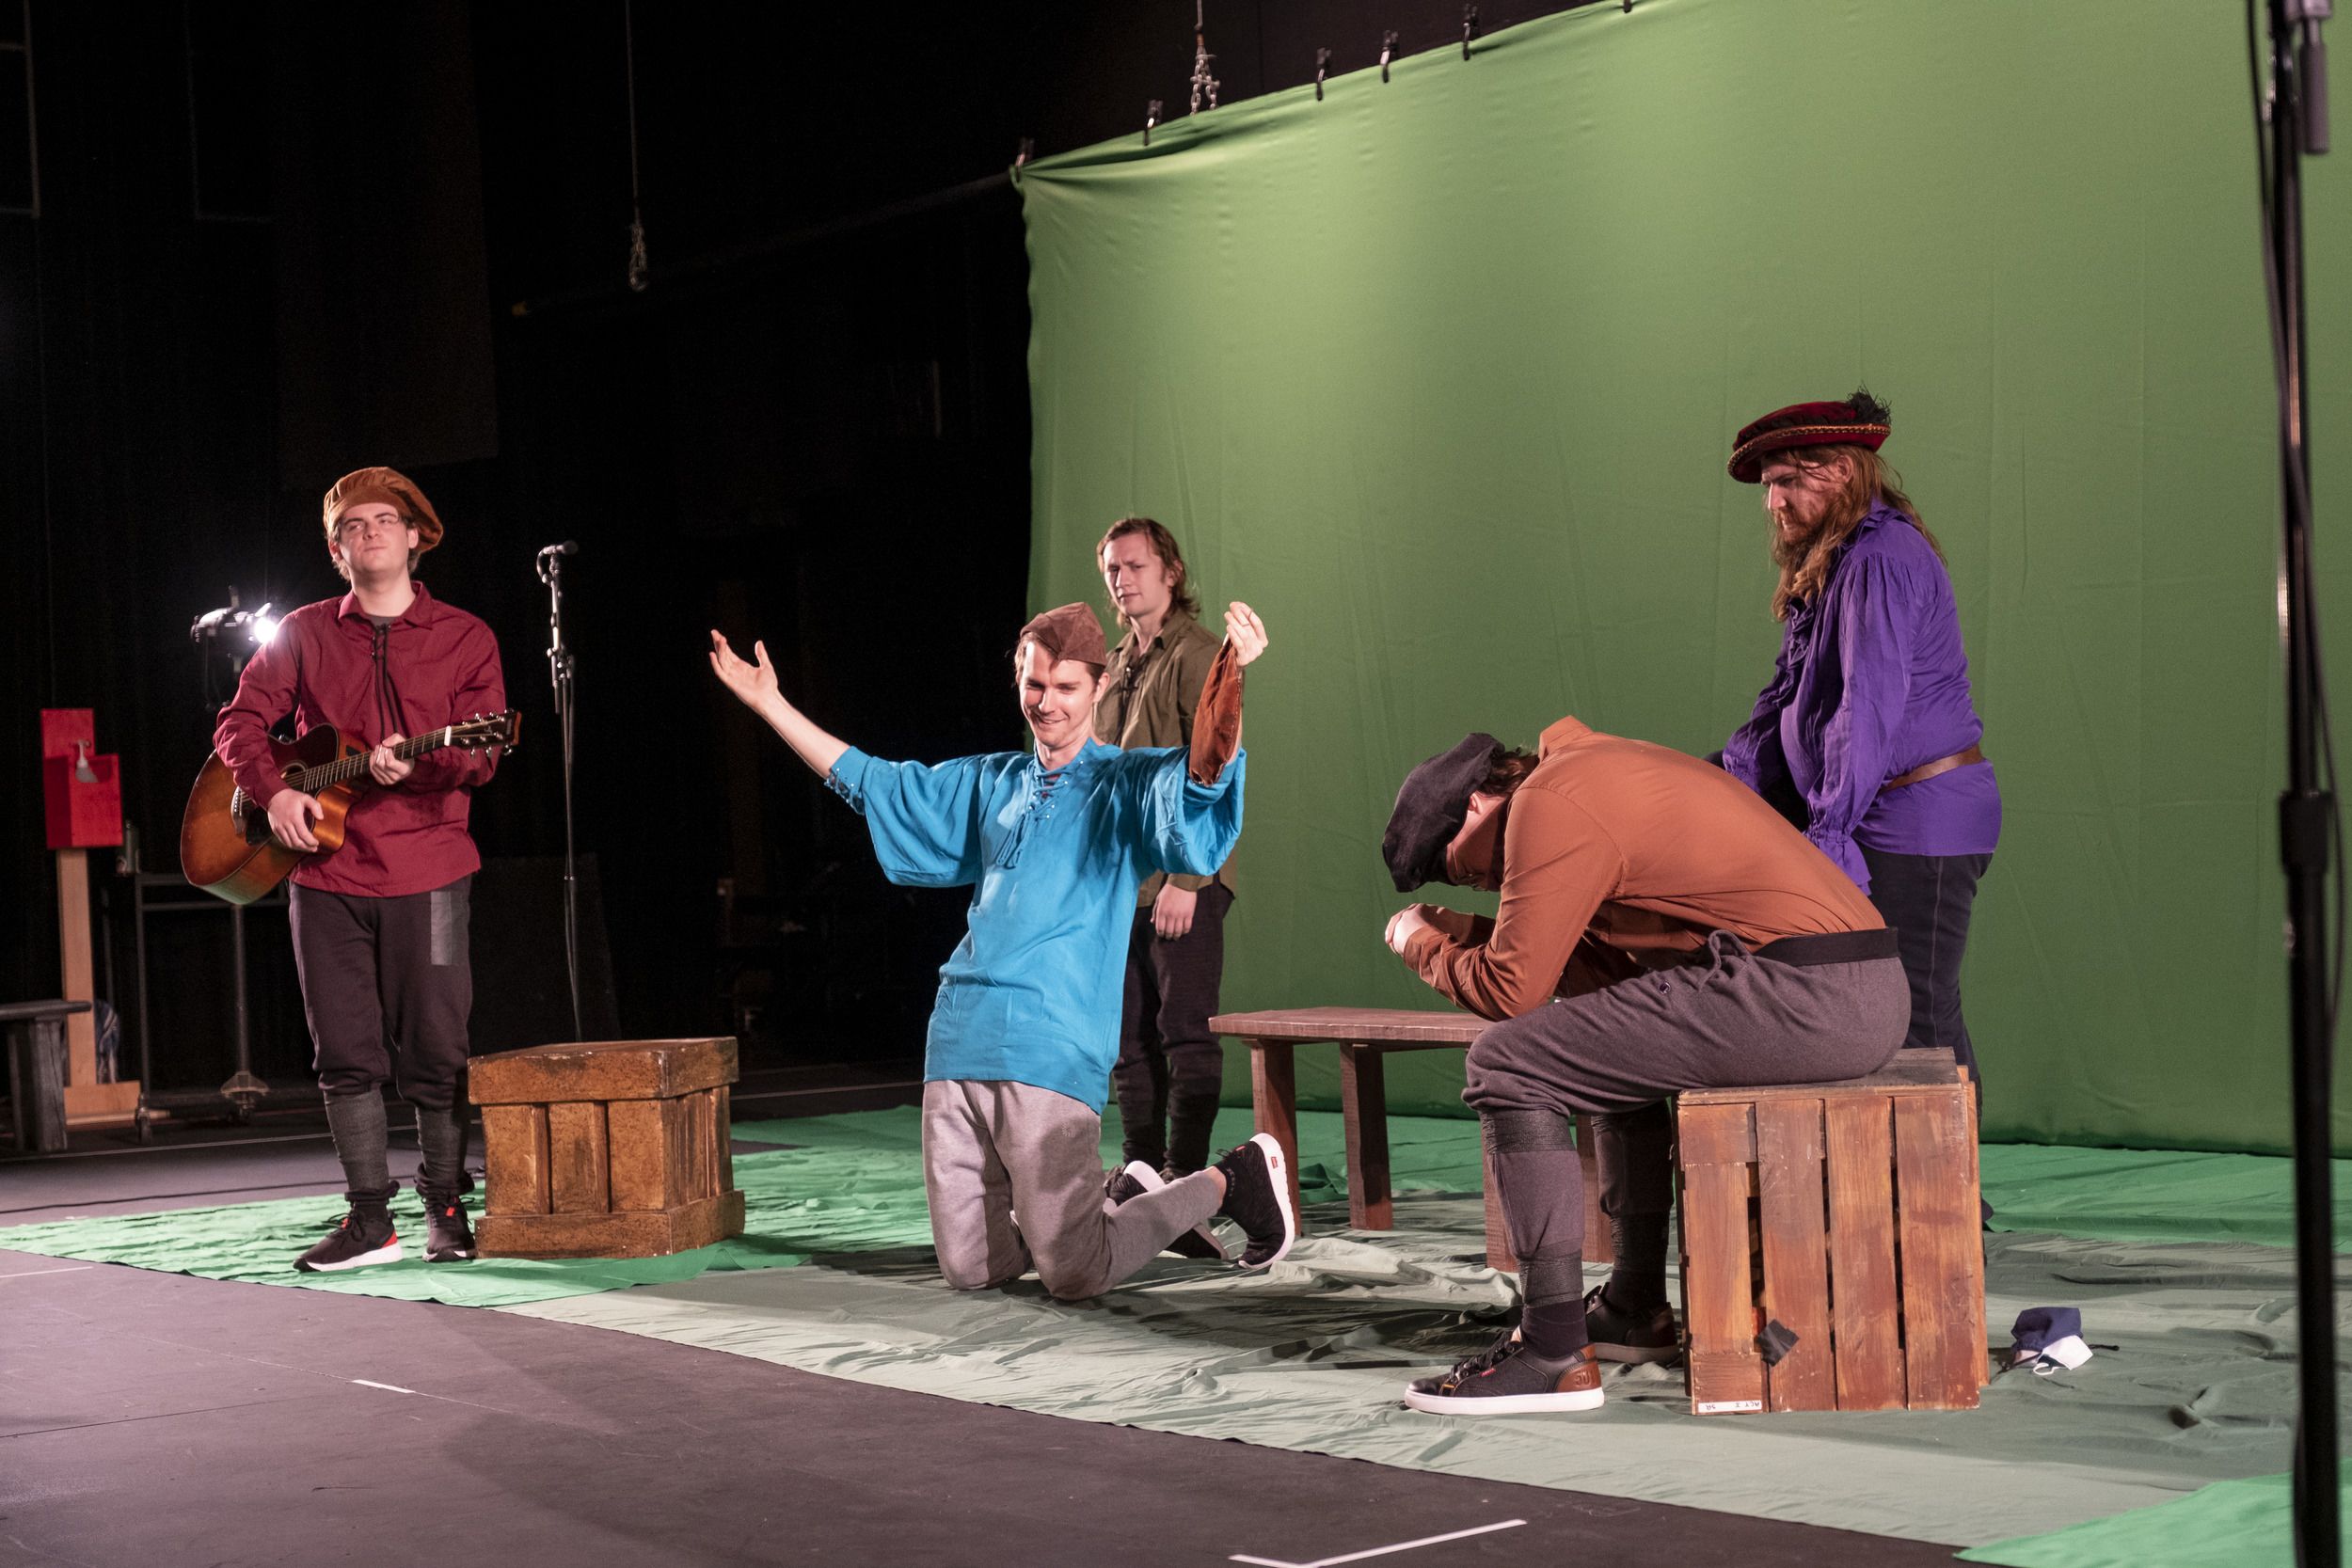 5 actors on stage, in front of a green screen.